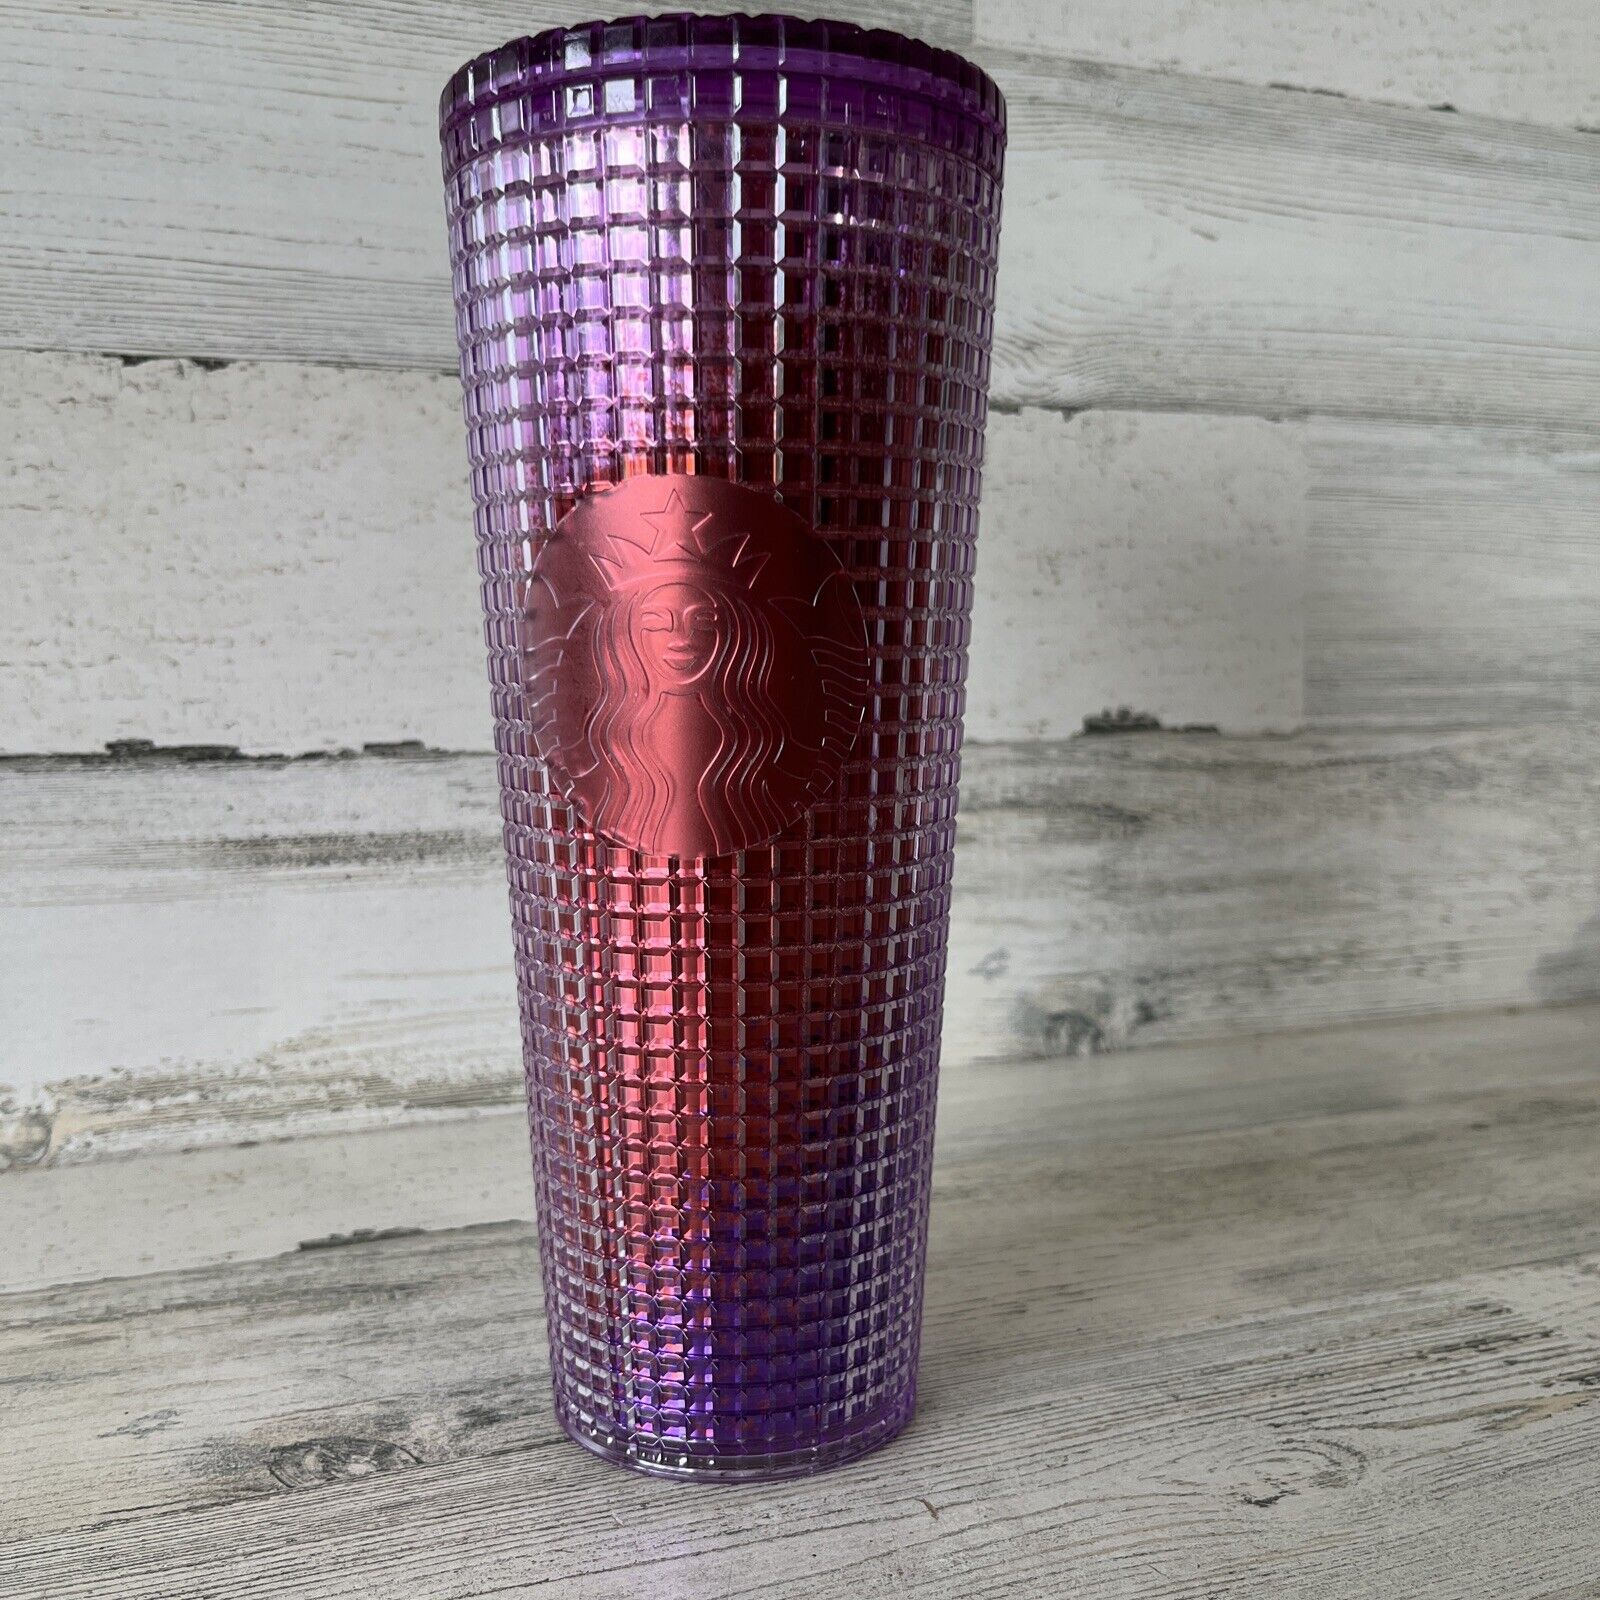 Starbucks Summer 2021 - Pink and Blue 24 oz Grid Cold Cup (Tumbler) - W/O Straw